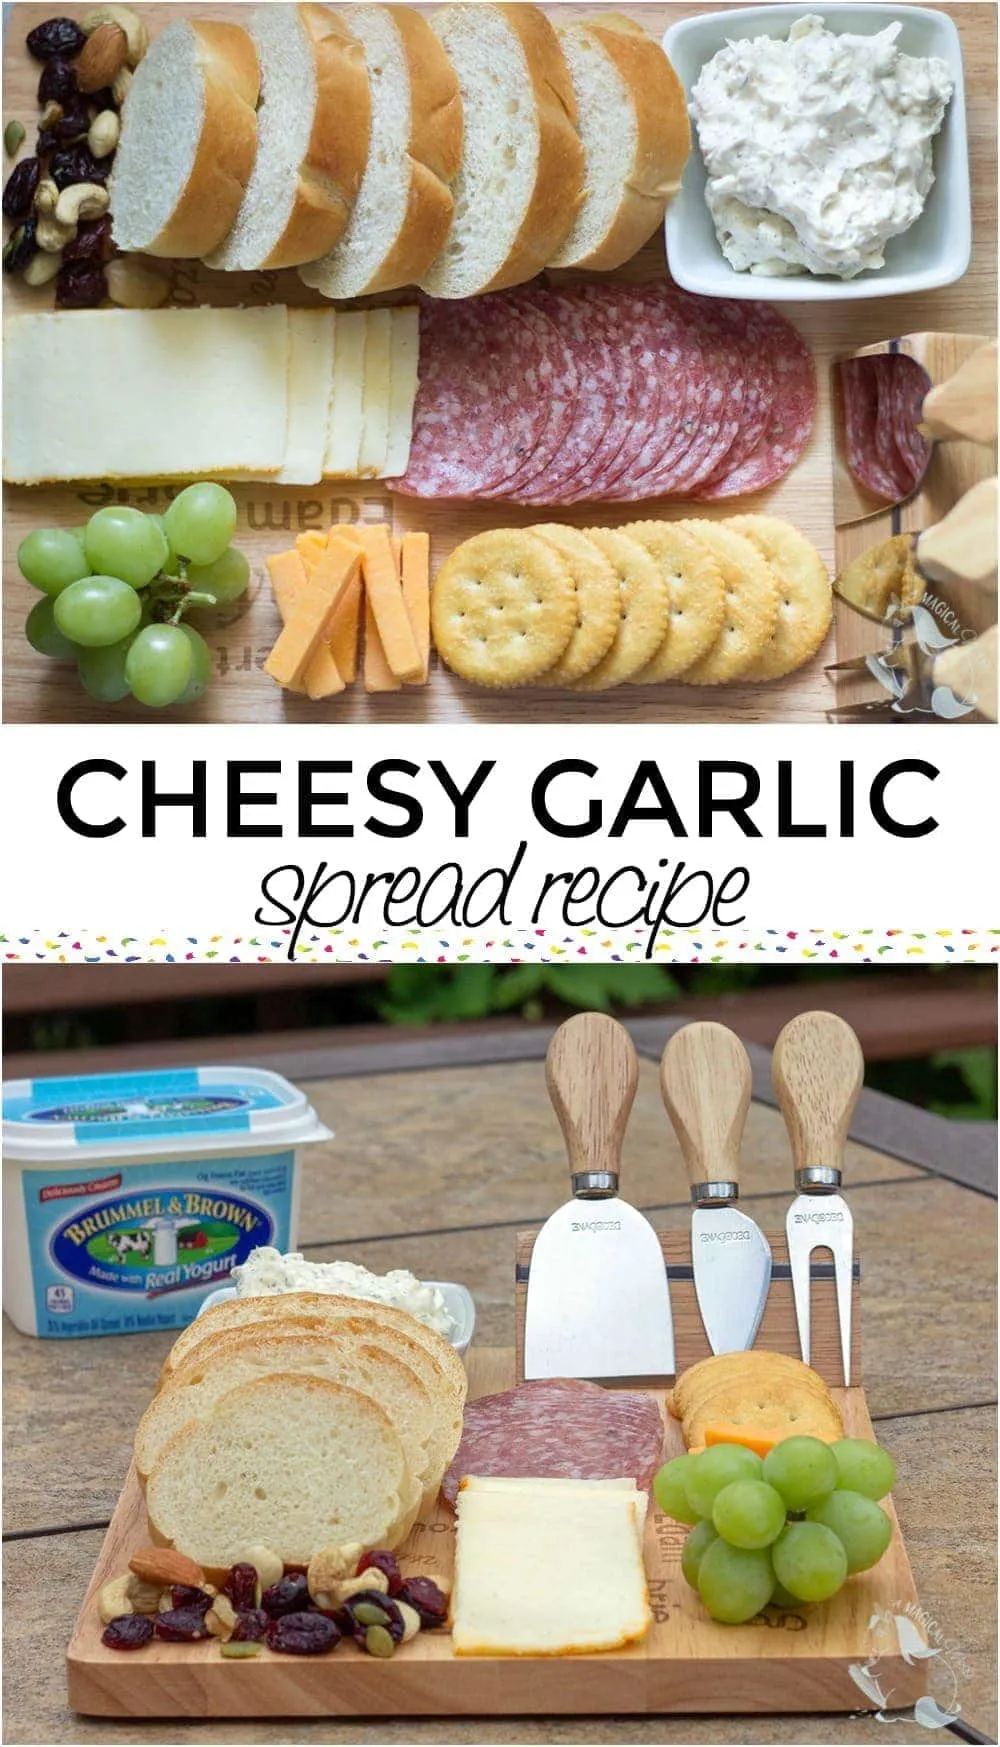 Easy Spreads Recipe - How to Make Spreads